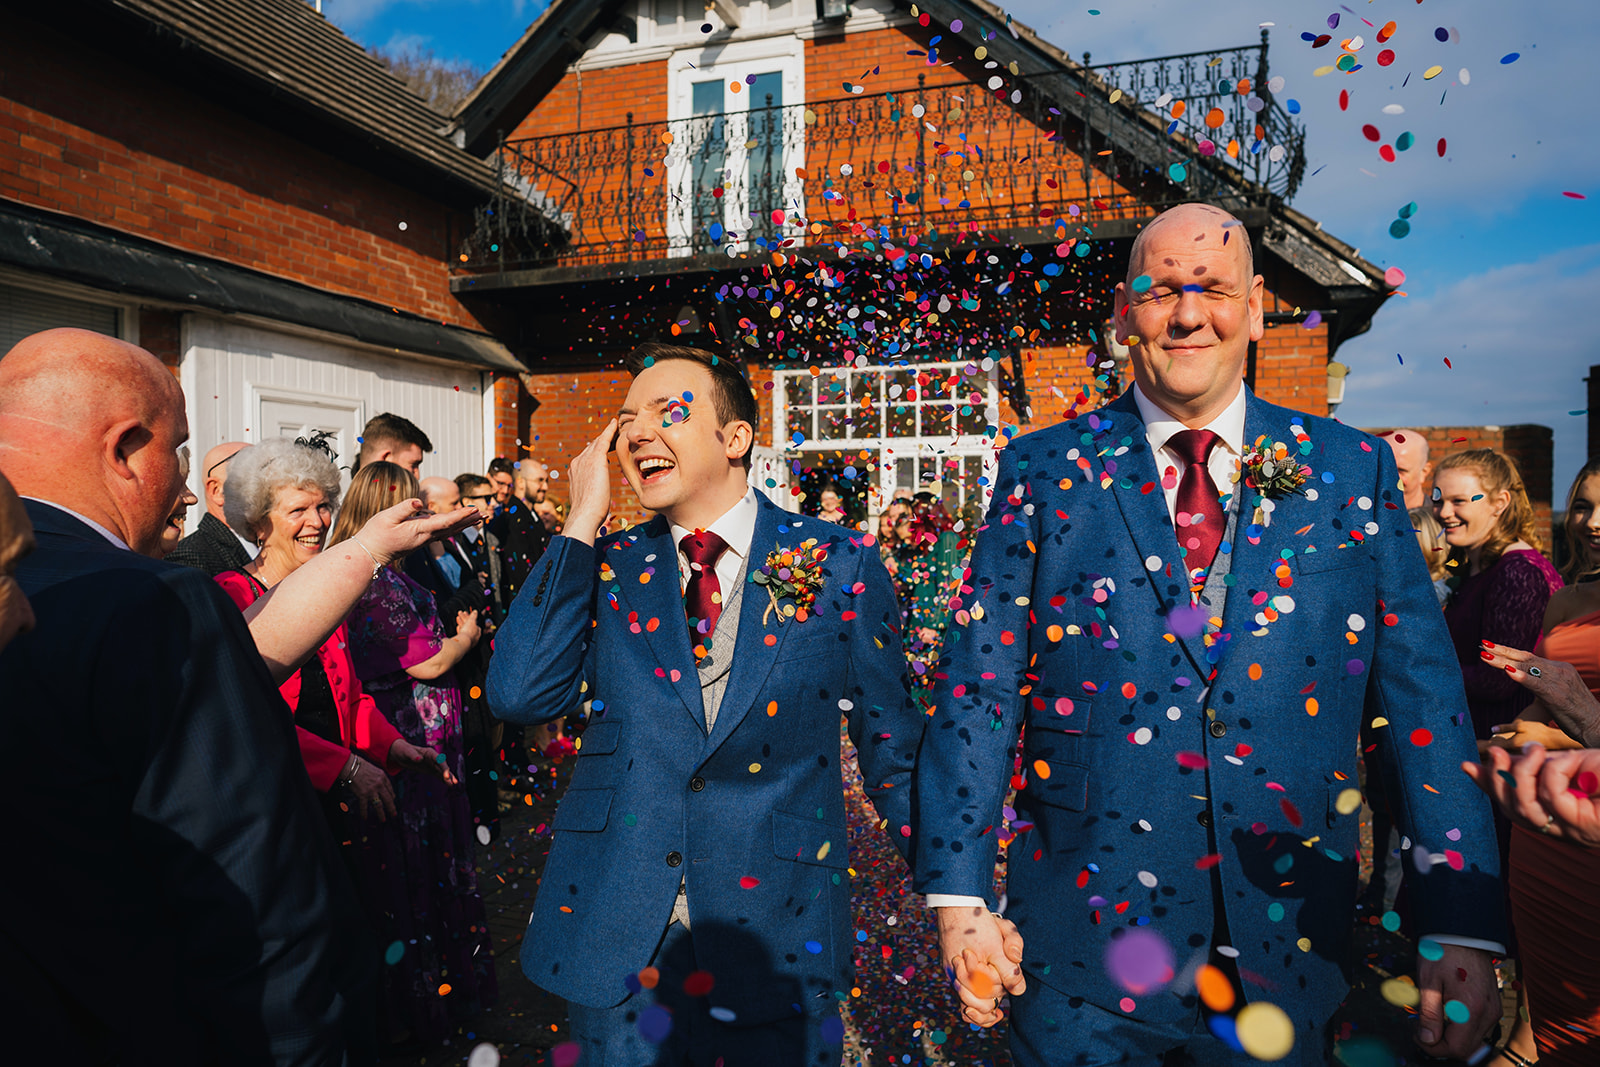 rainbow coloured confetti gets thrown over the grooms